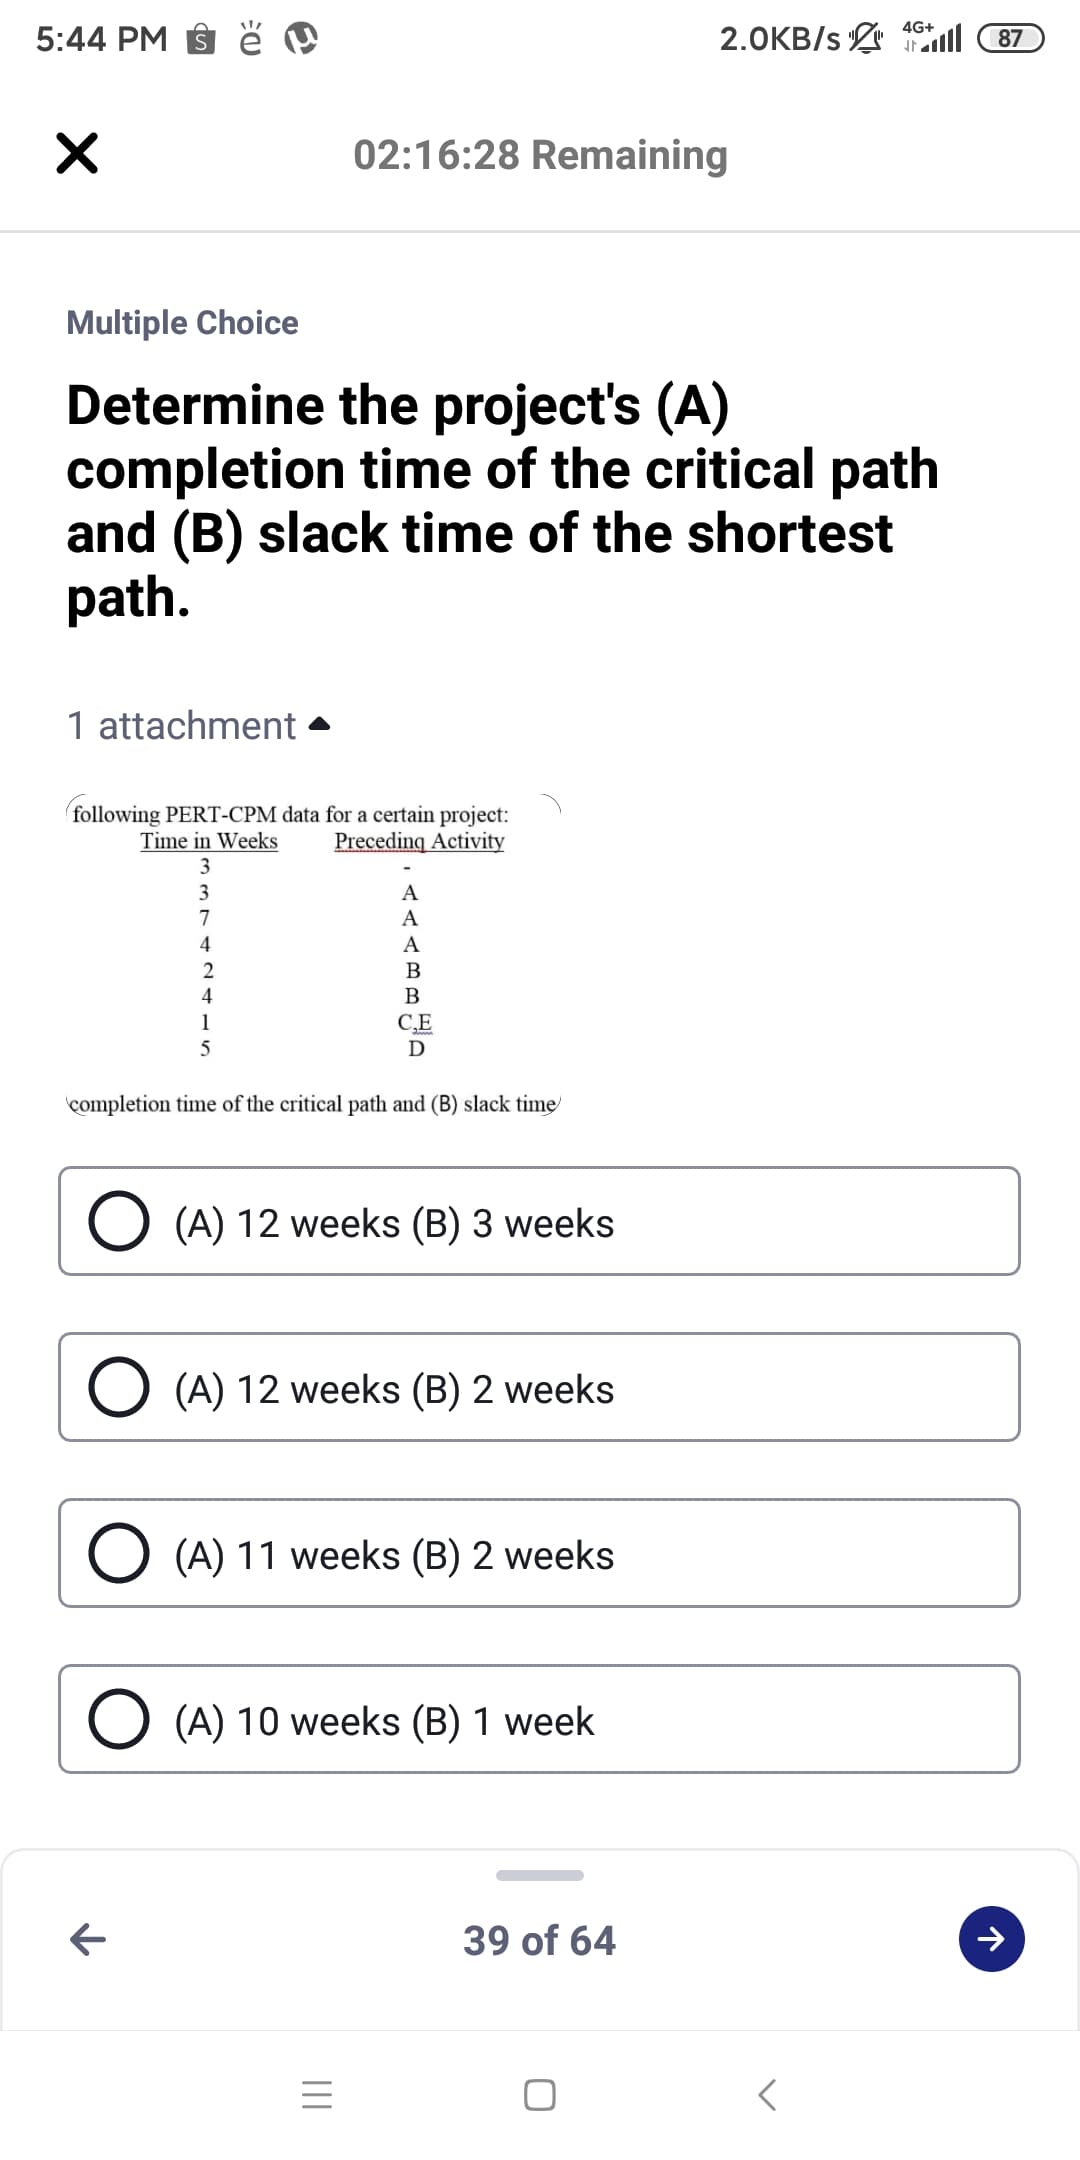 4G+
5:44 PM S
2.0KB/s 1ll
87
02:16:28 Remaining
Multiple Choice
Determine the project's (A)
completion time of the critical path
and (B) slack time of the shortest
path.
1 attachment
following PERT-CPM data for a certain project:
Preceding Activity
Time in Weeks
3
3
A
7
A
4
A
B
4
В
1
C,E
completion time of the critical path and (B) slack time
O (A) 12 weeks (B) 3 weeks
O (A) 12 weeks (B) 2 weeks
O (A) 11 weeks (B) 2 weeks
(A) 10 weeks (B) 1 week
39 of 64
II
